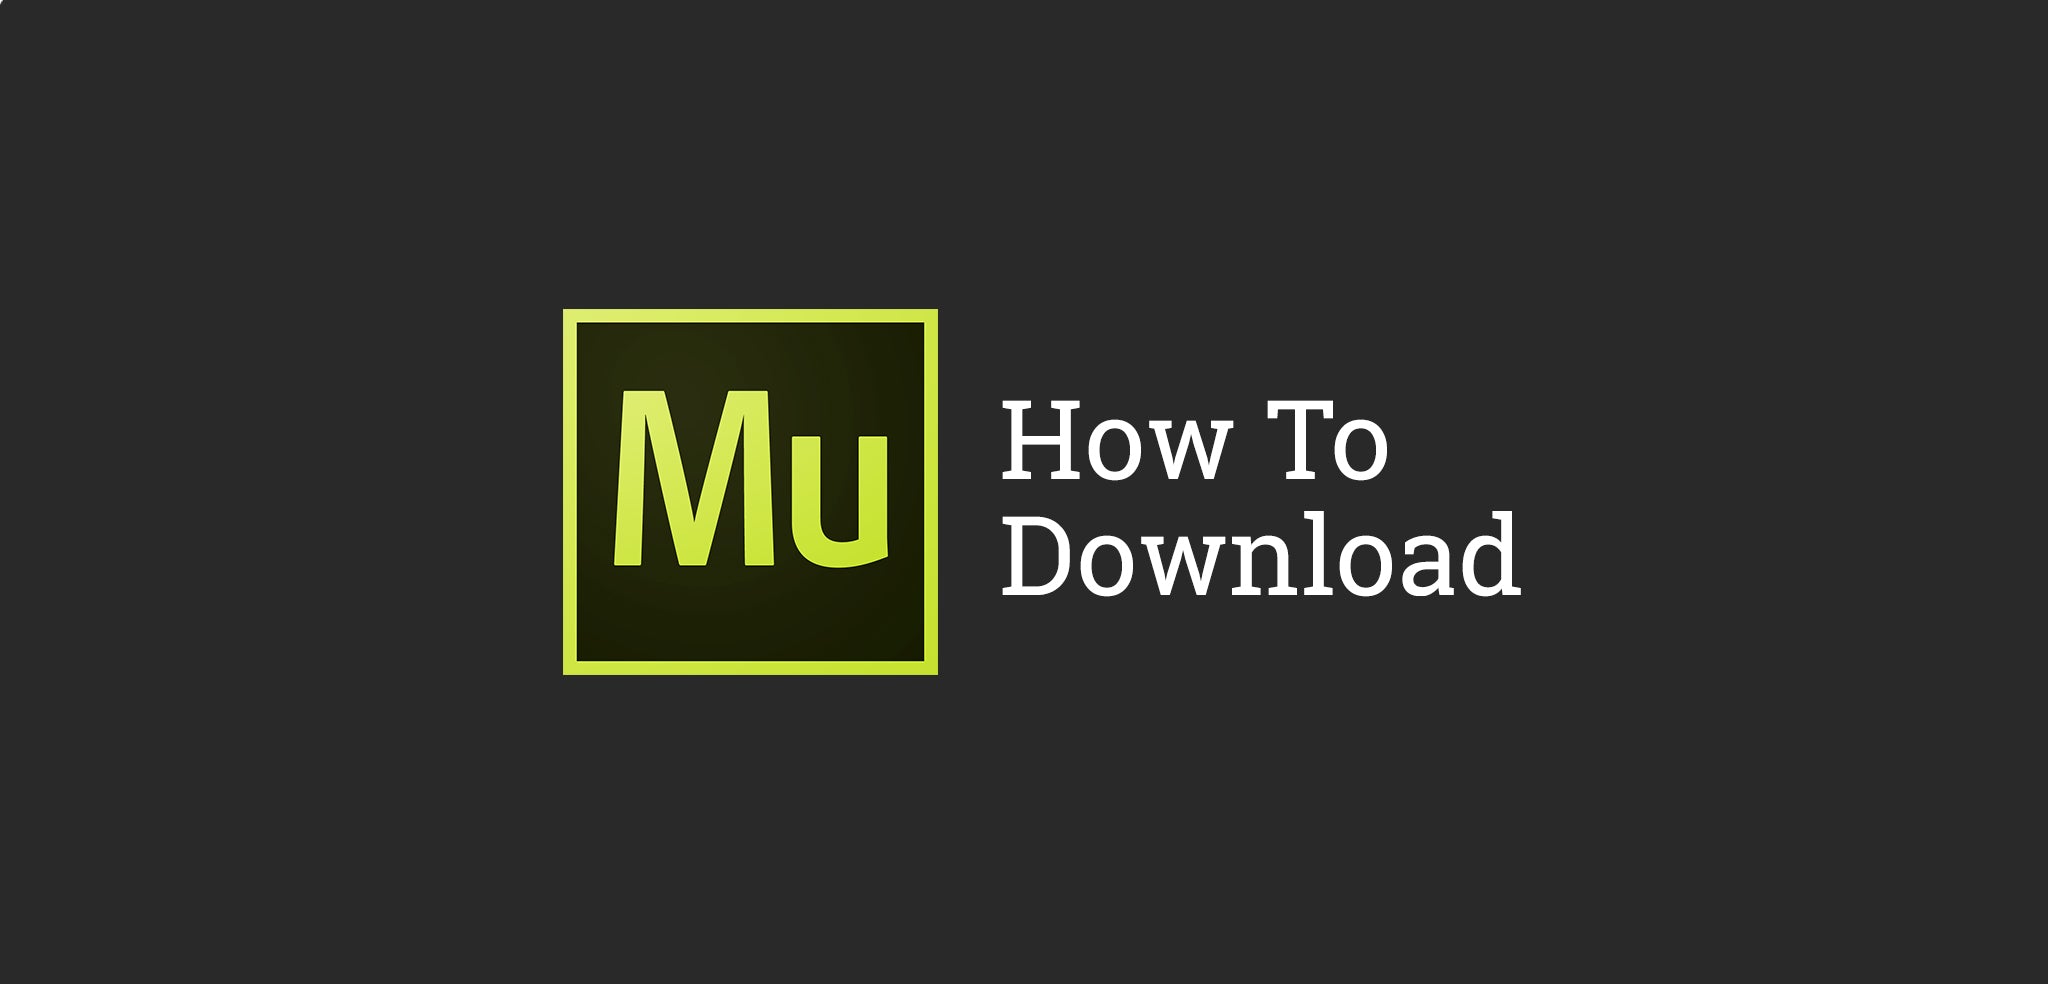 How to download Adobe Mue